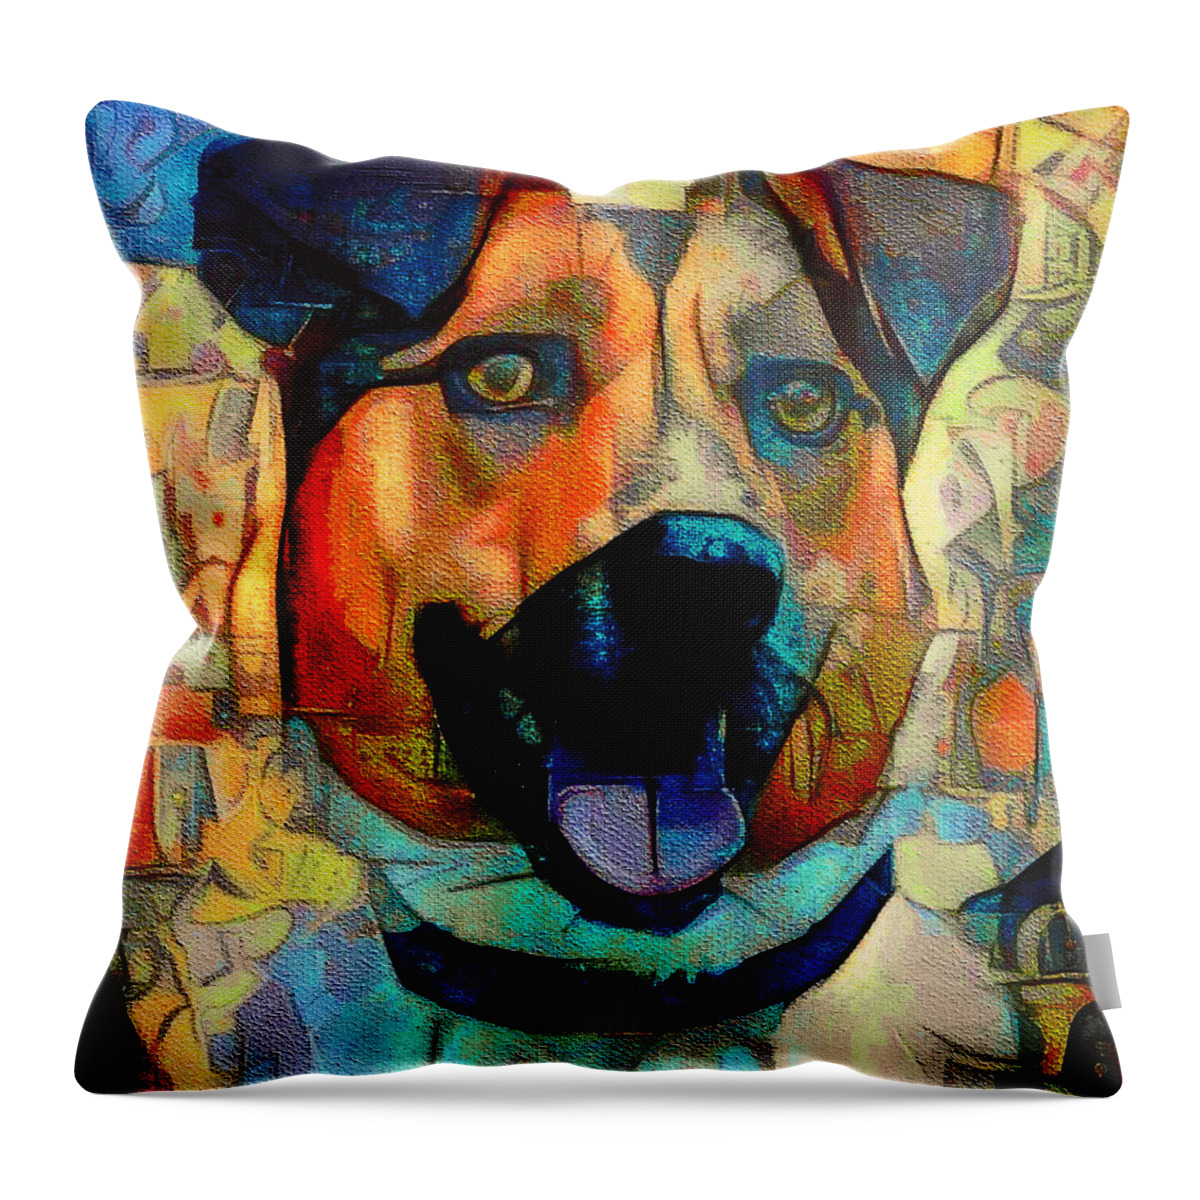 Dog Throw Pillow featuring the digital art Dog And Cubes by Yury Malkov